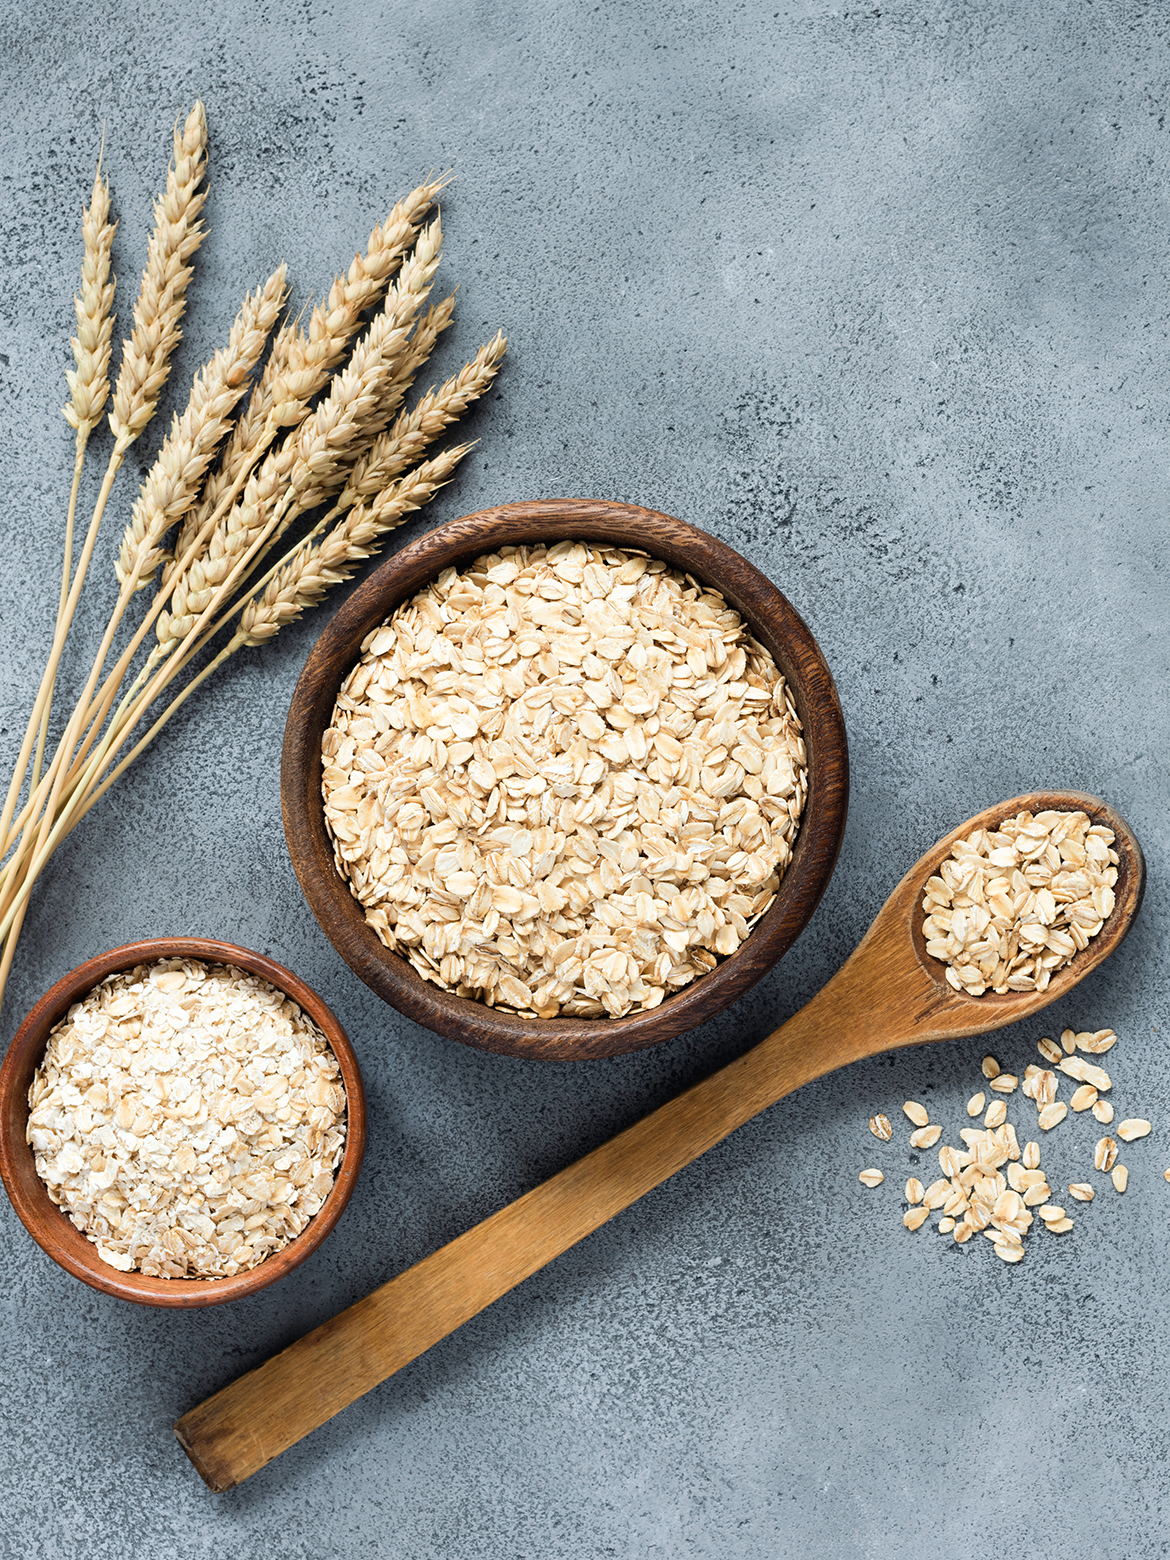 How To Add Oats To Your Beauty Regime - SUGAR Cosmetics